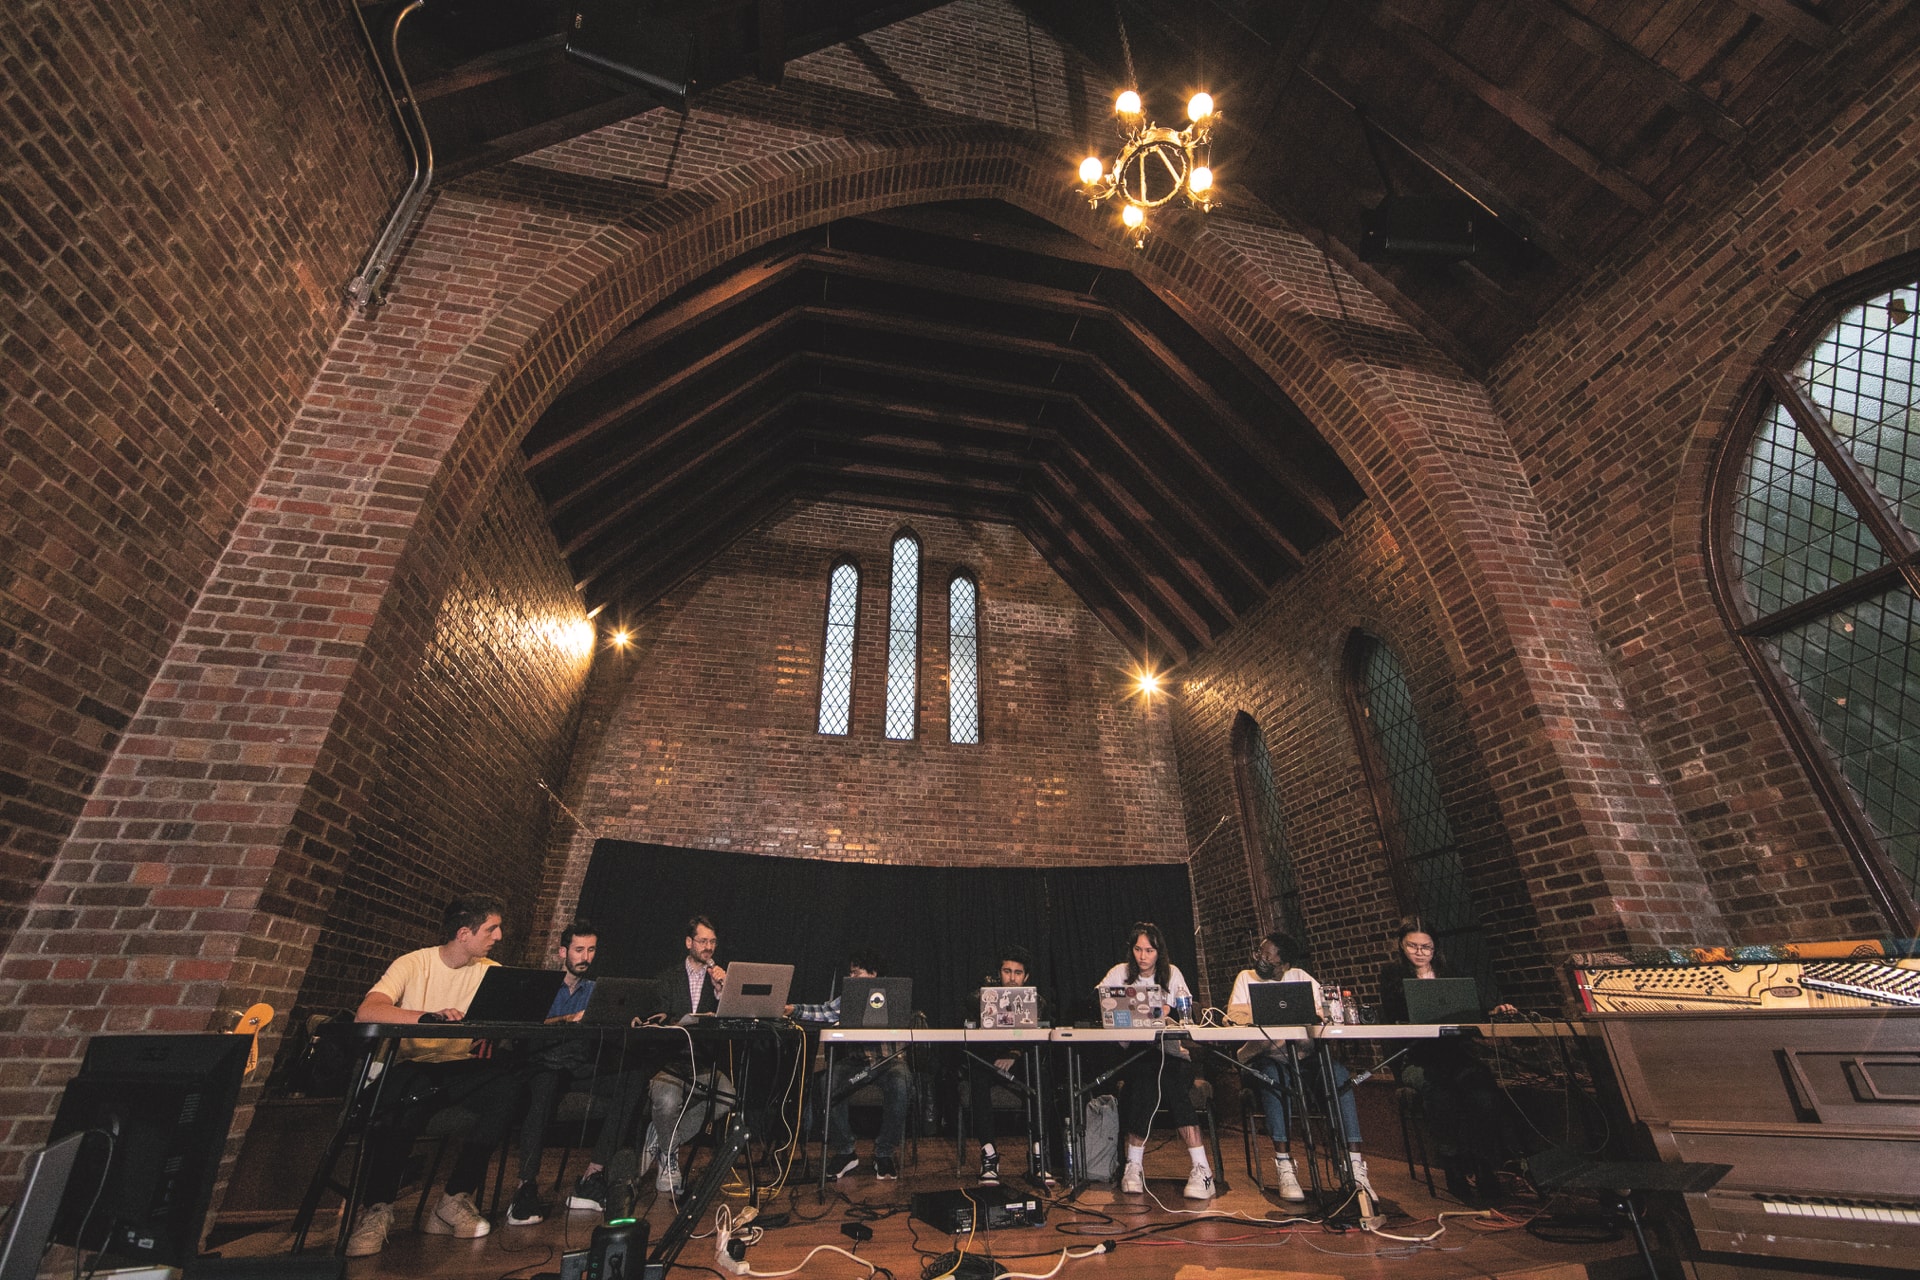 The Duke Laptop Ensemble’s debut concert filled The Northstar Church brick hall with sound.